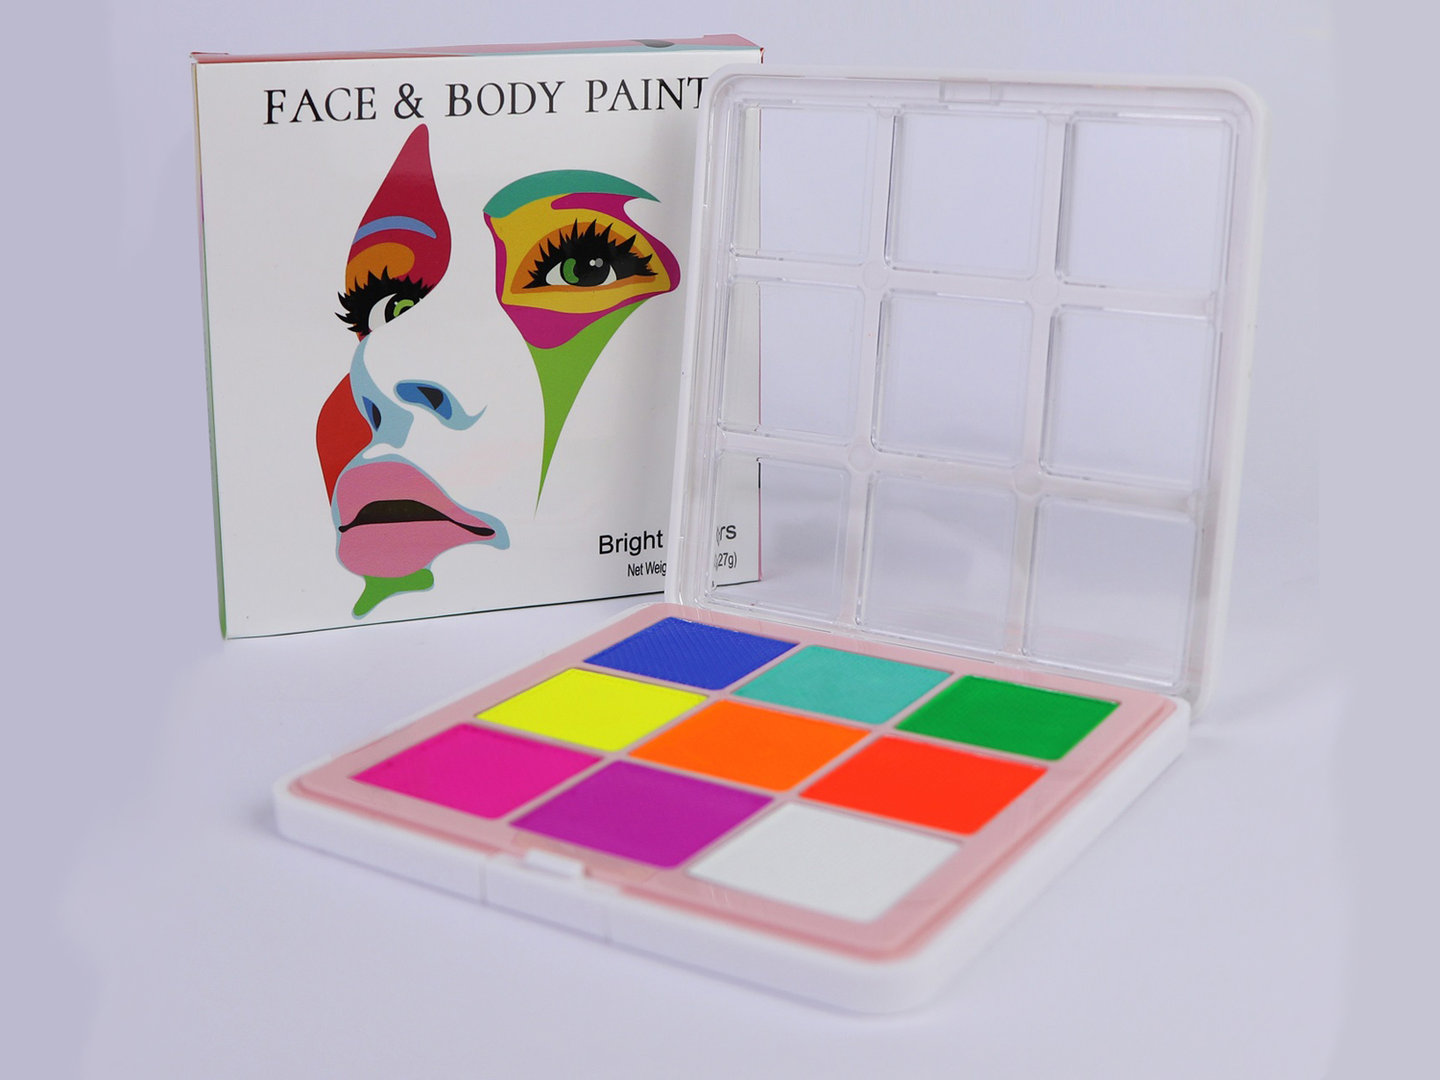 Bodypainting Facepainting set of water colors - 9 PCS BRIGHT SET (27g)